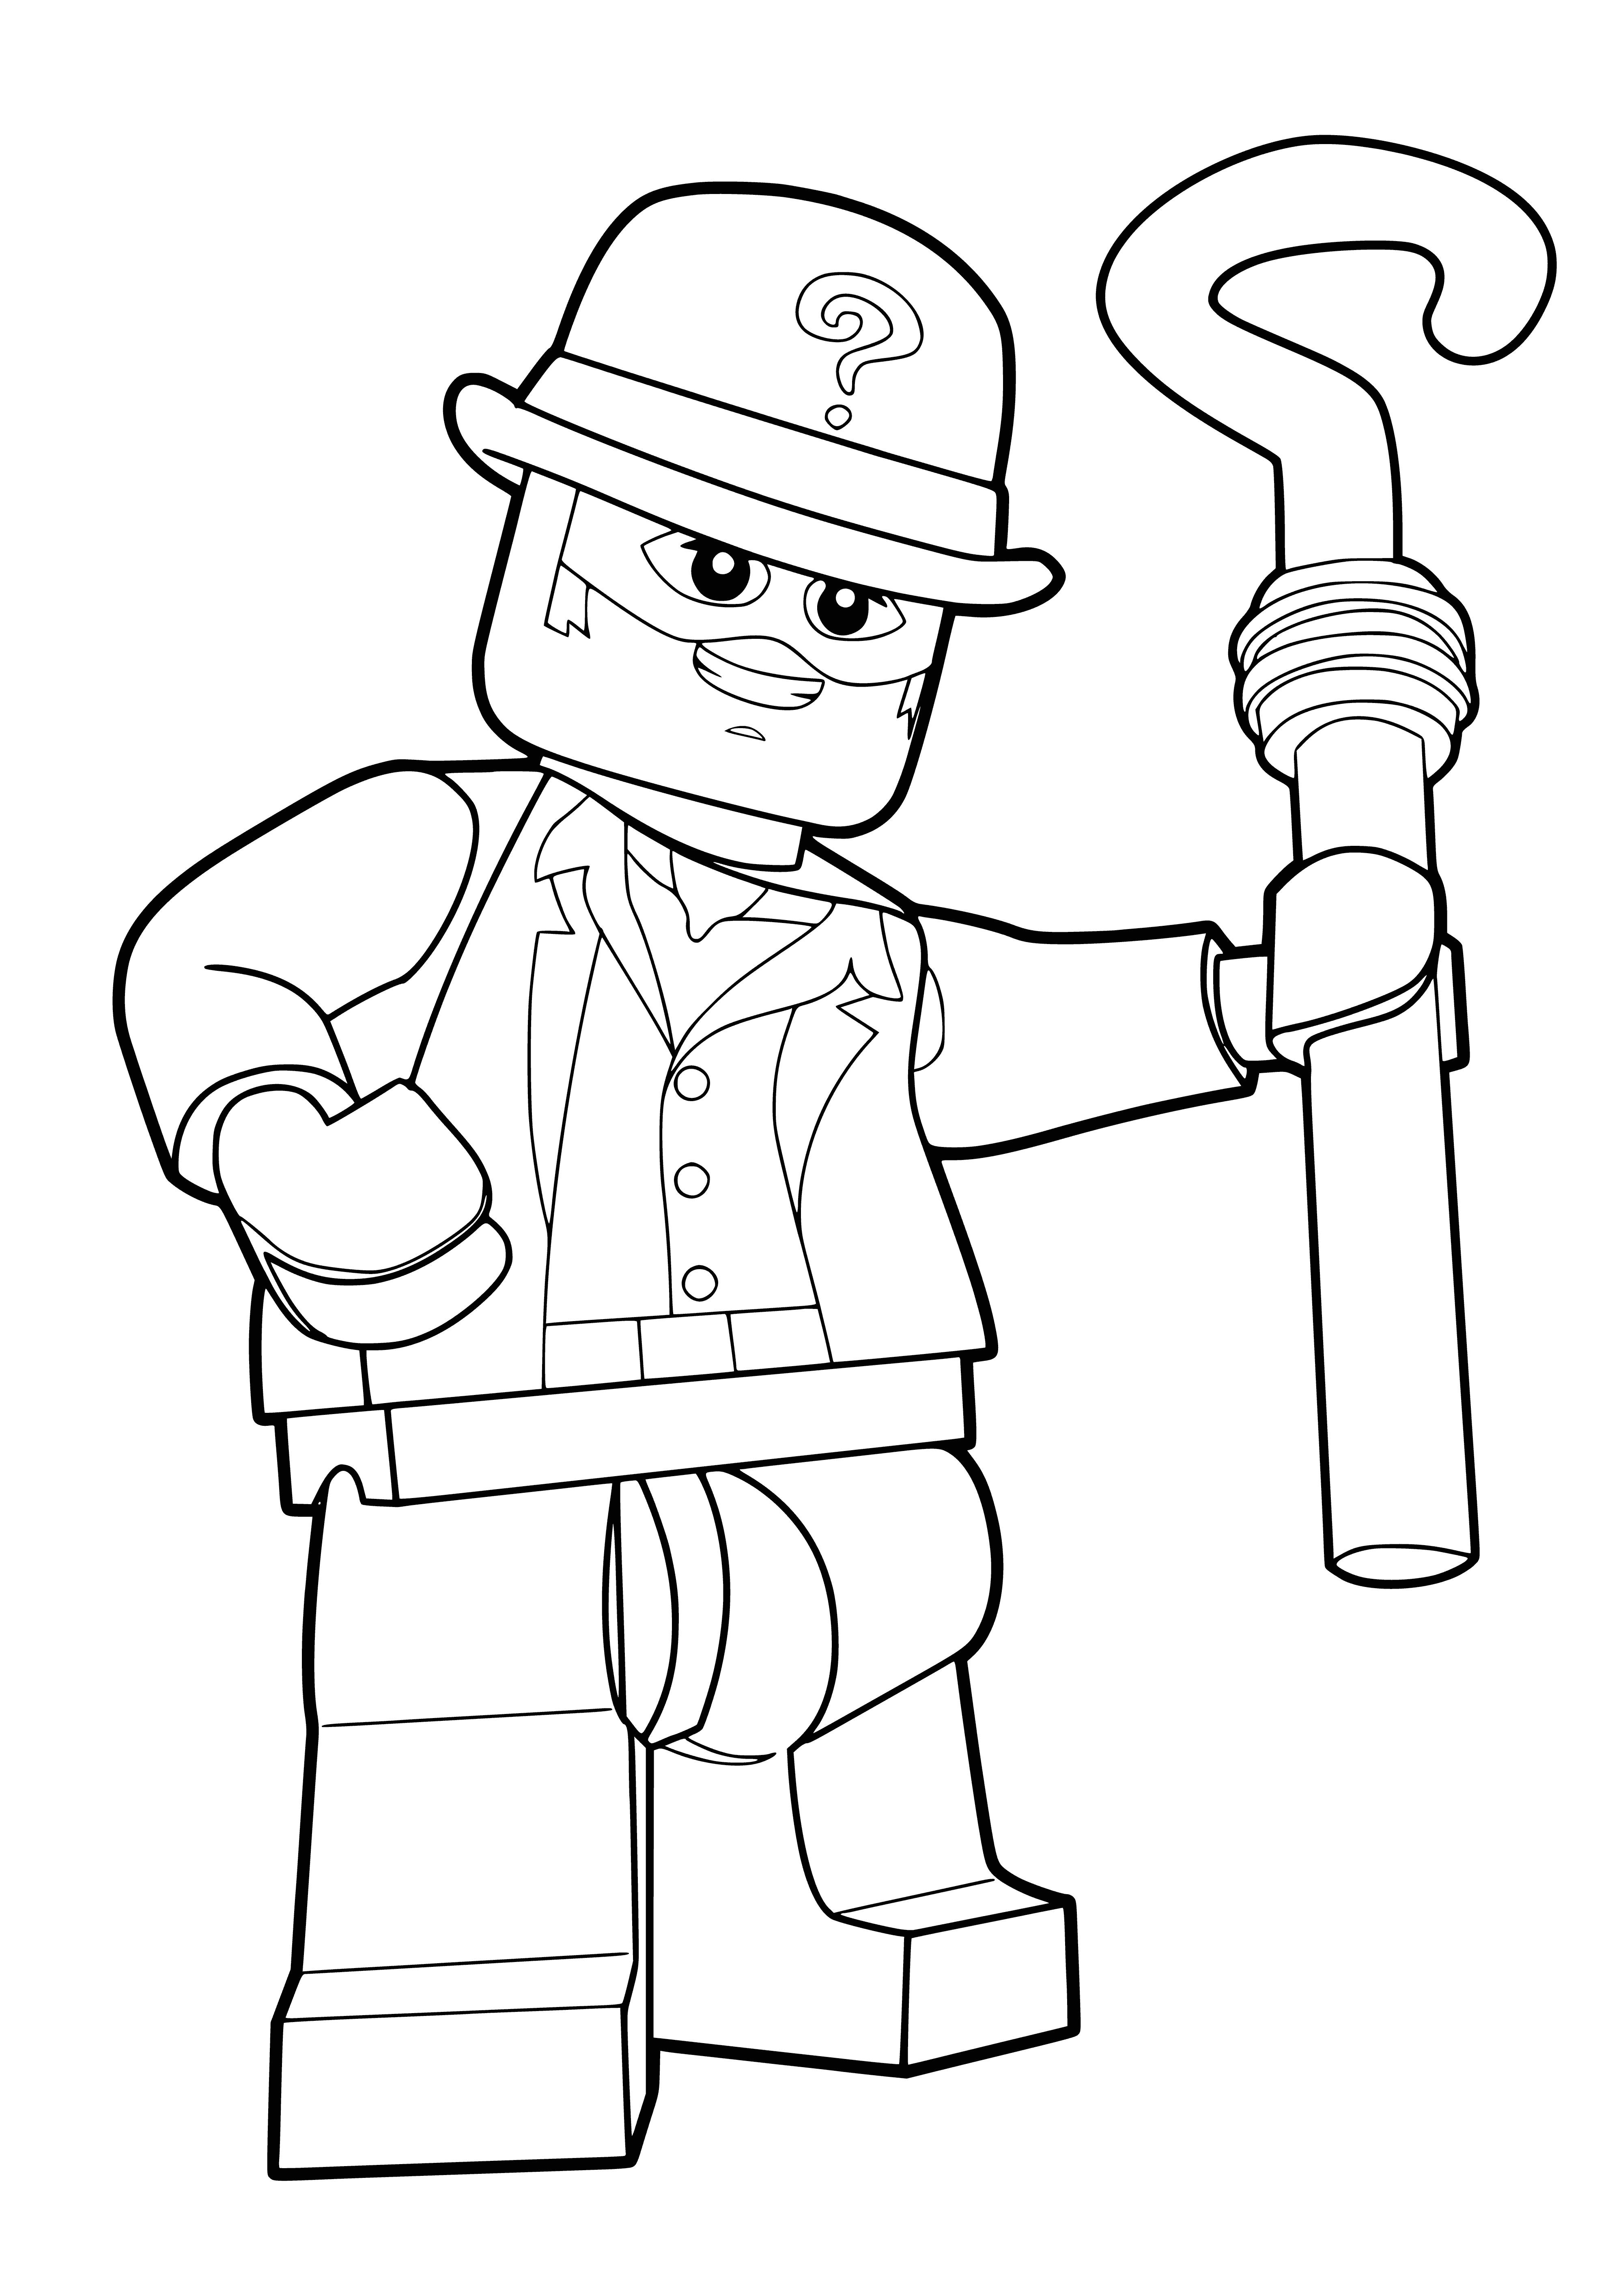 Riddler coloring page